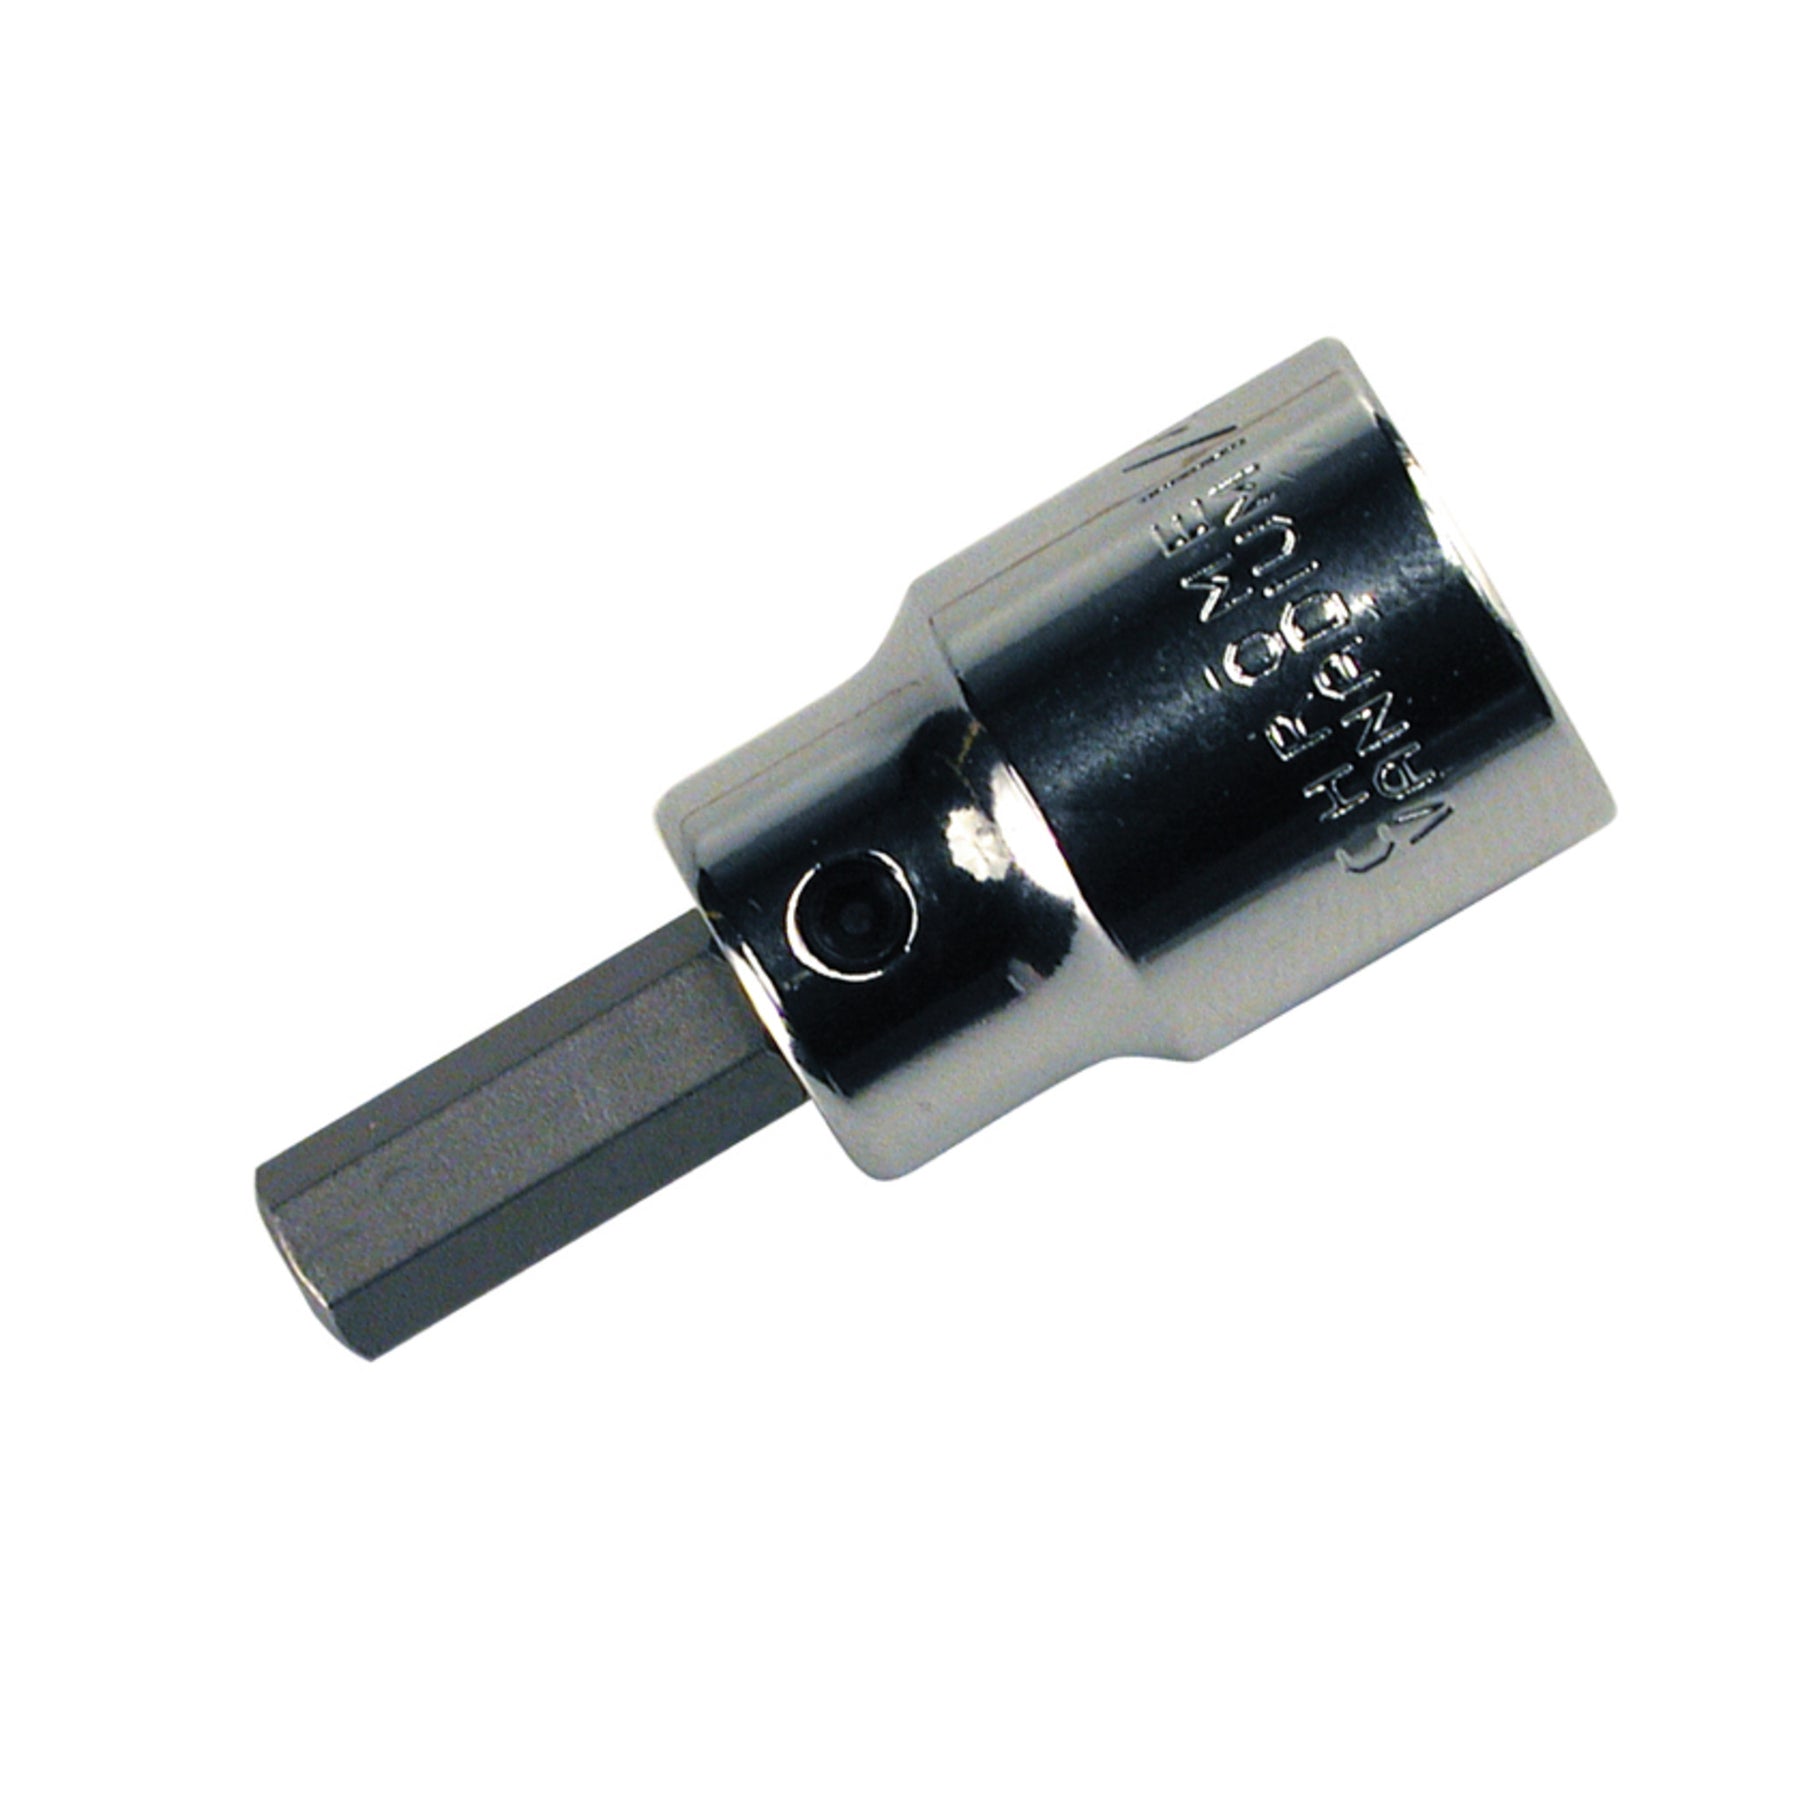 Security Hex BitSocket 3/8" Drive 7/64"